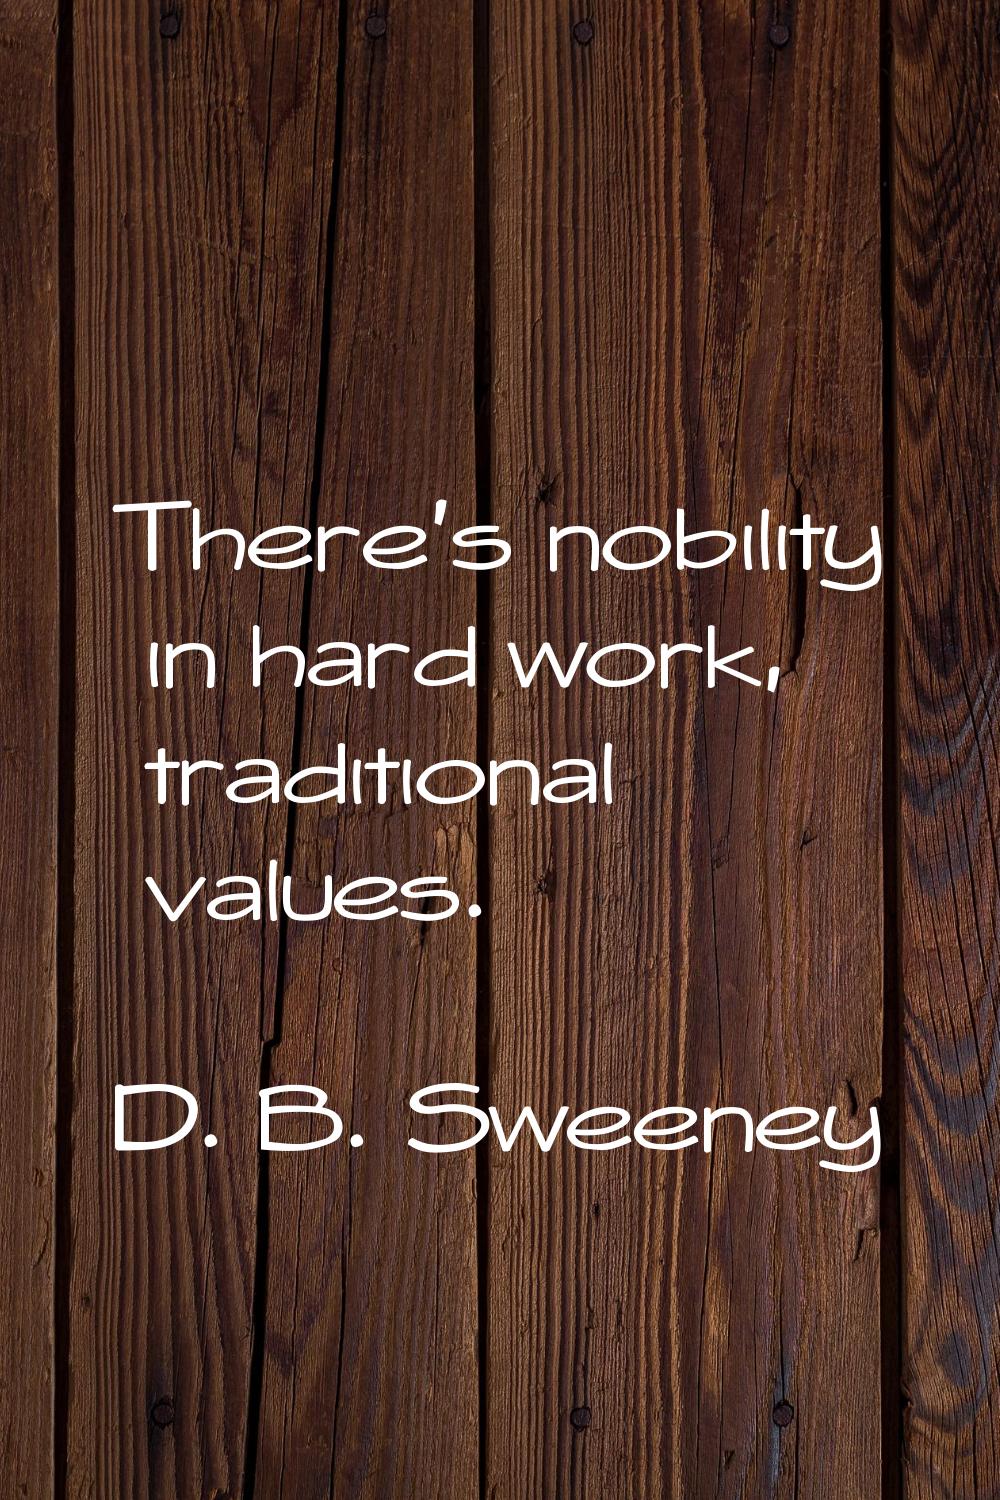 There's nobility in hard work, traditional values.